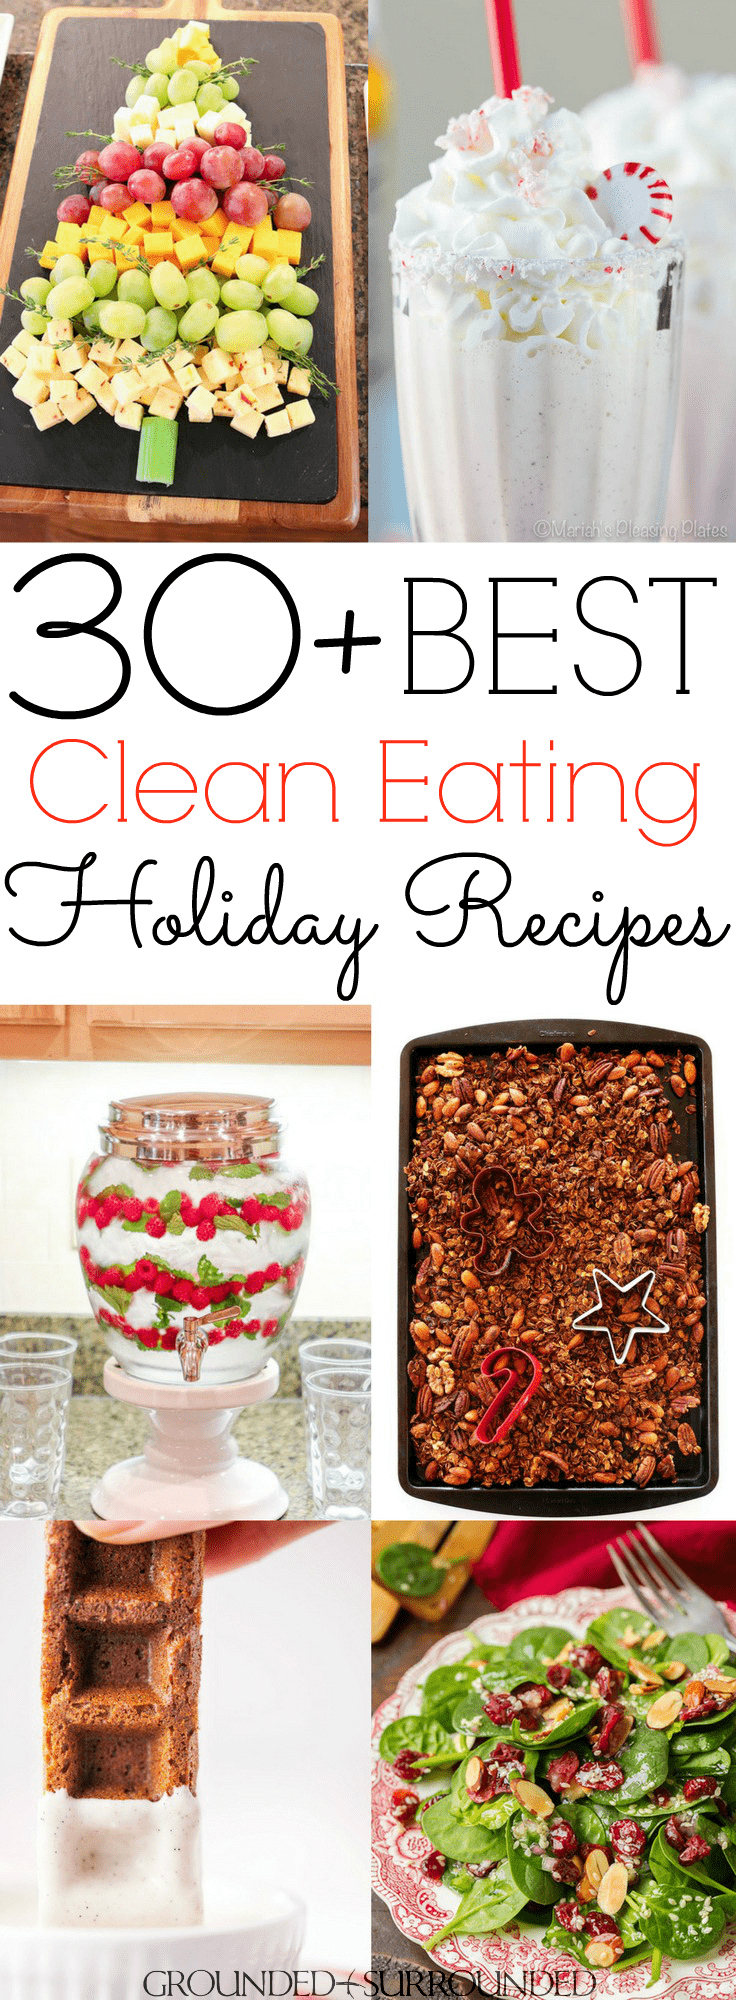 The 30+ BEST Clean Eating Holiday Recipes | Christmas is my favorite holiday! Oh, the food! You will find festive breakfast (donuts), healthy dinner, easy dessert, side dish (brussels sprouts), and fun snack ideas (candy canes) for kids parties or a cozy night in. Not to mention drinks, cookies, gingerbread, egg nog, green beans, and cider recipes to satisify your need for classic and comforting flavors! Most are gluten free / Paleo / low carb / dairy free, vegetarian and vegan substitutions can be made too.